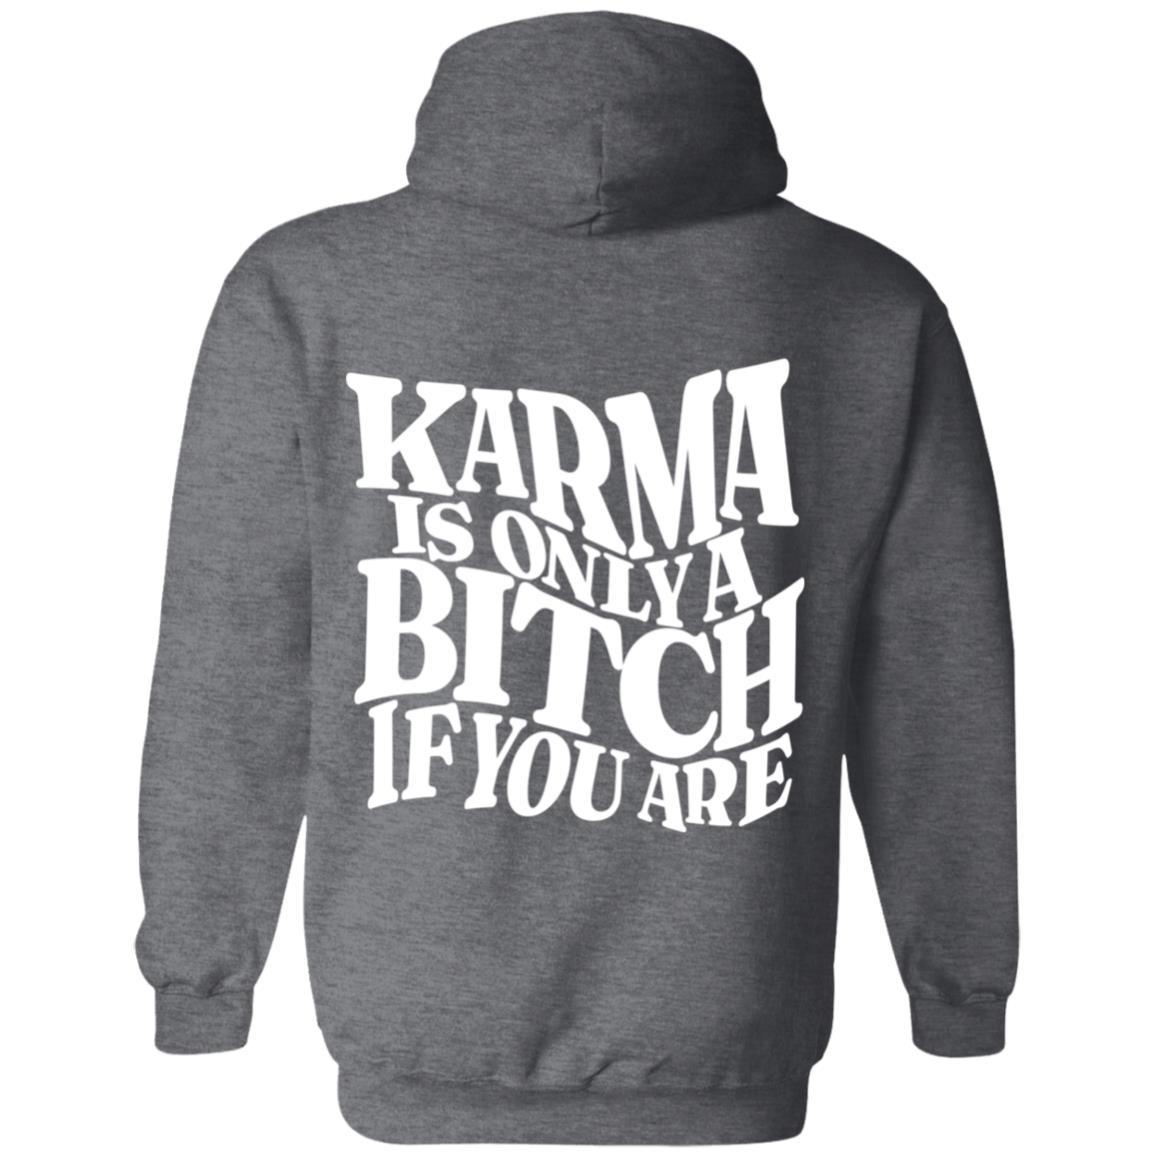 Pullover Hoodie - Karma Is Only A Bitch If You Are - Design On Back - White Letters - Large Scorp Zone Logo On Front